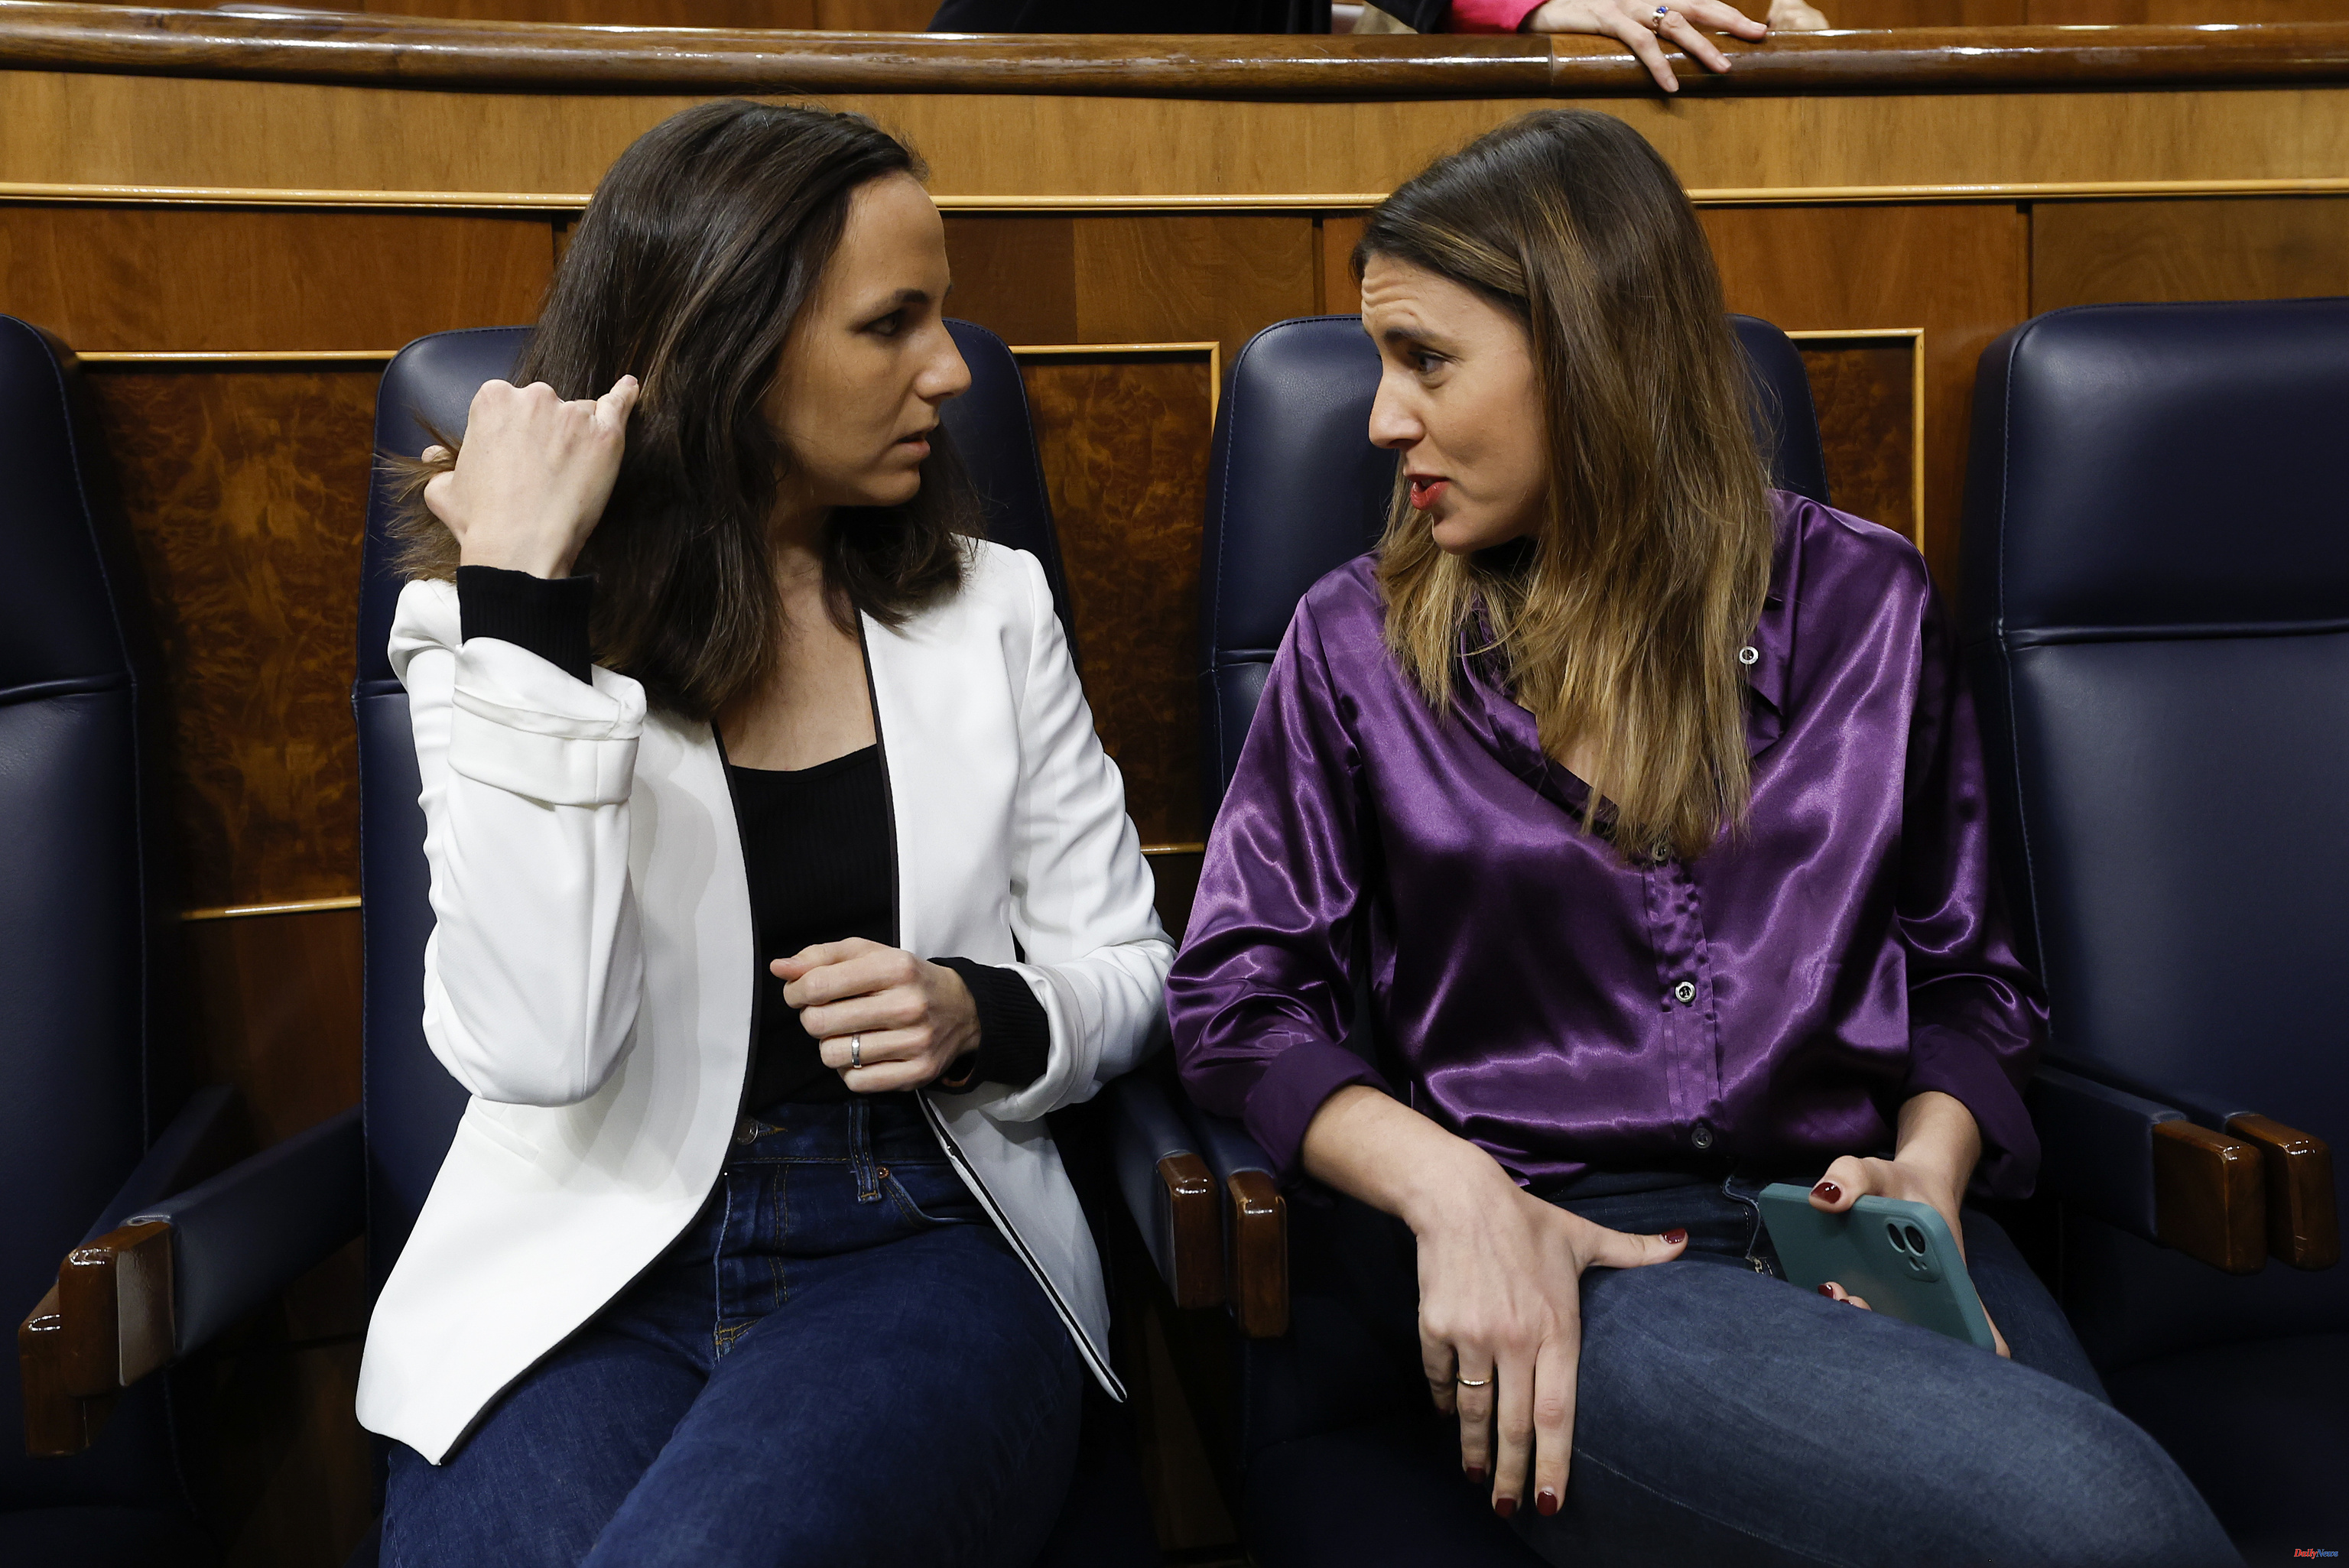 Politics Podemos insists on erasing itself while IU throws itself into the presentation of Yolanda Díaz with all its leadership